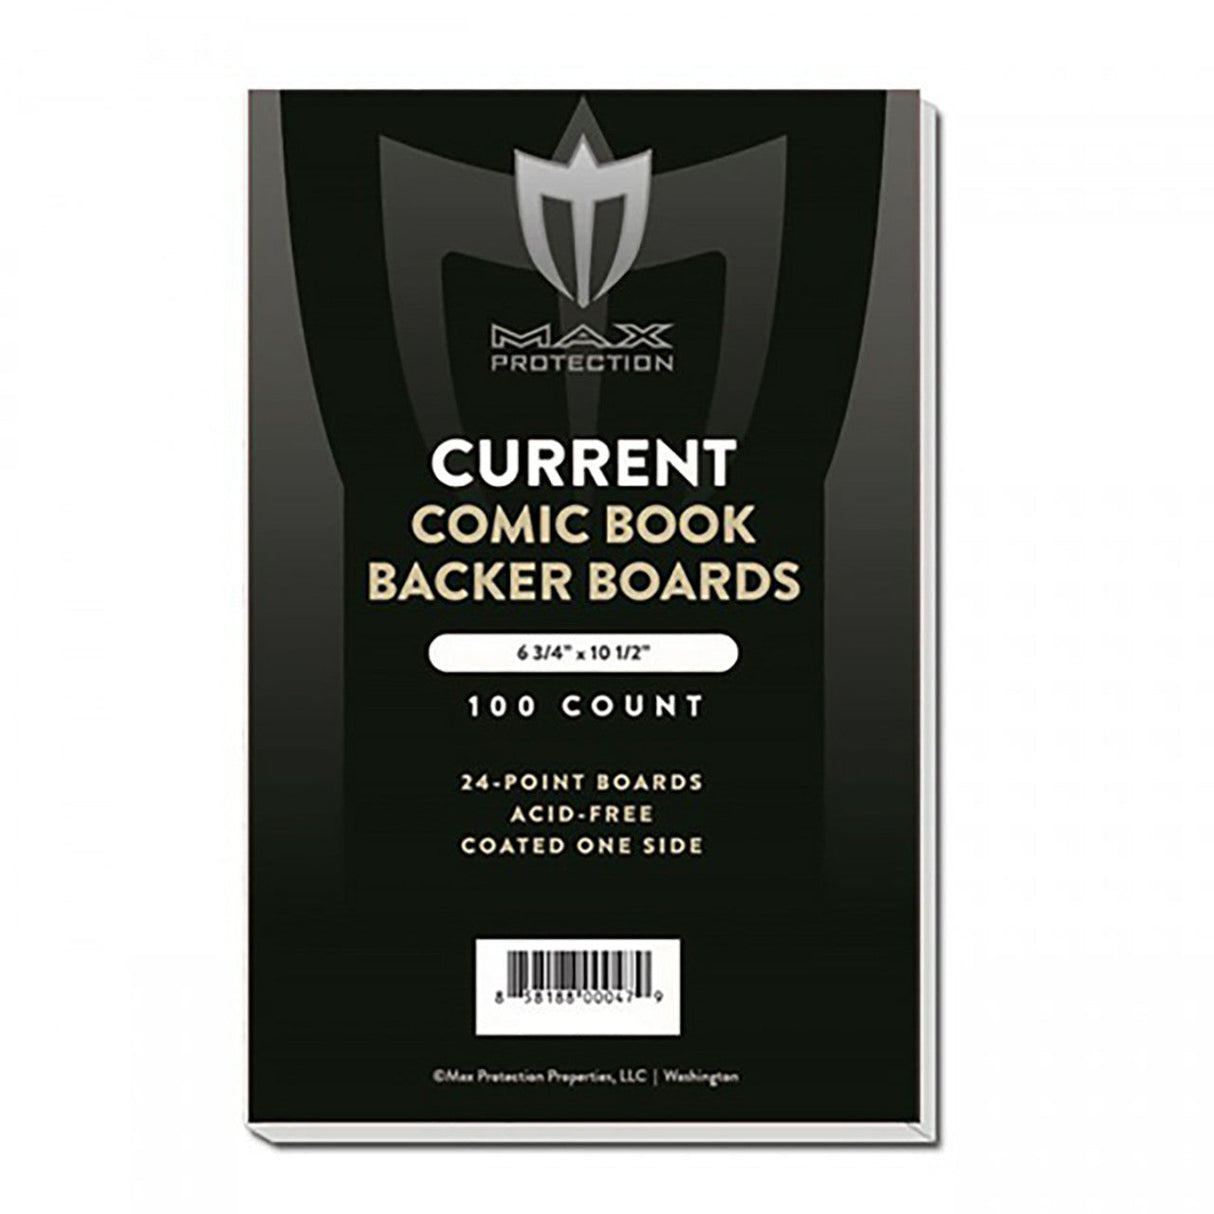 1000ct Case Comic Backing Boards - Current - 6-3/4 x 10-1/2